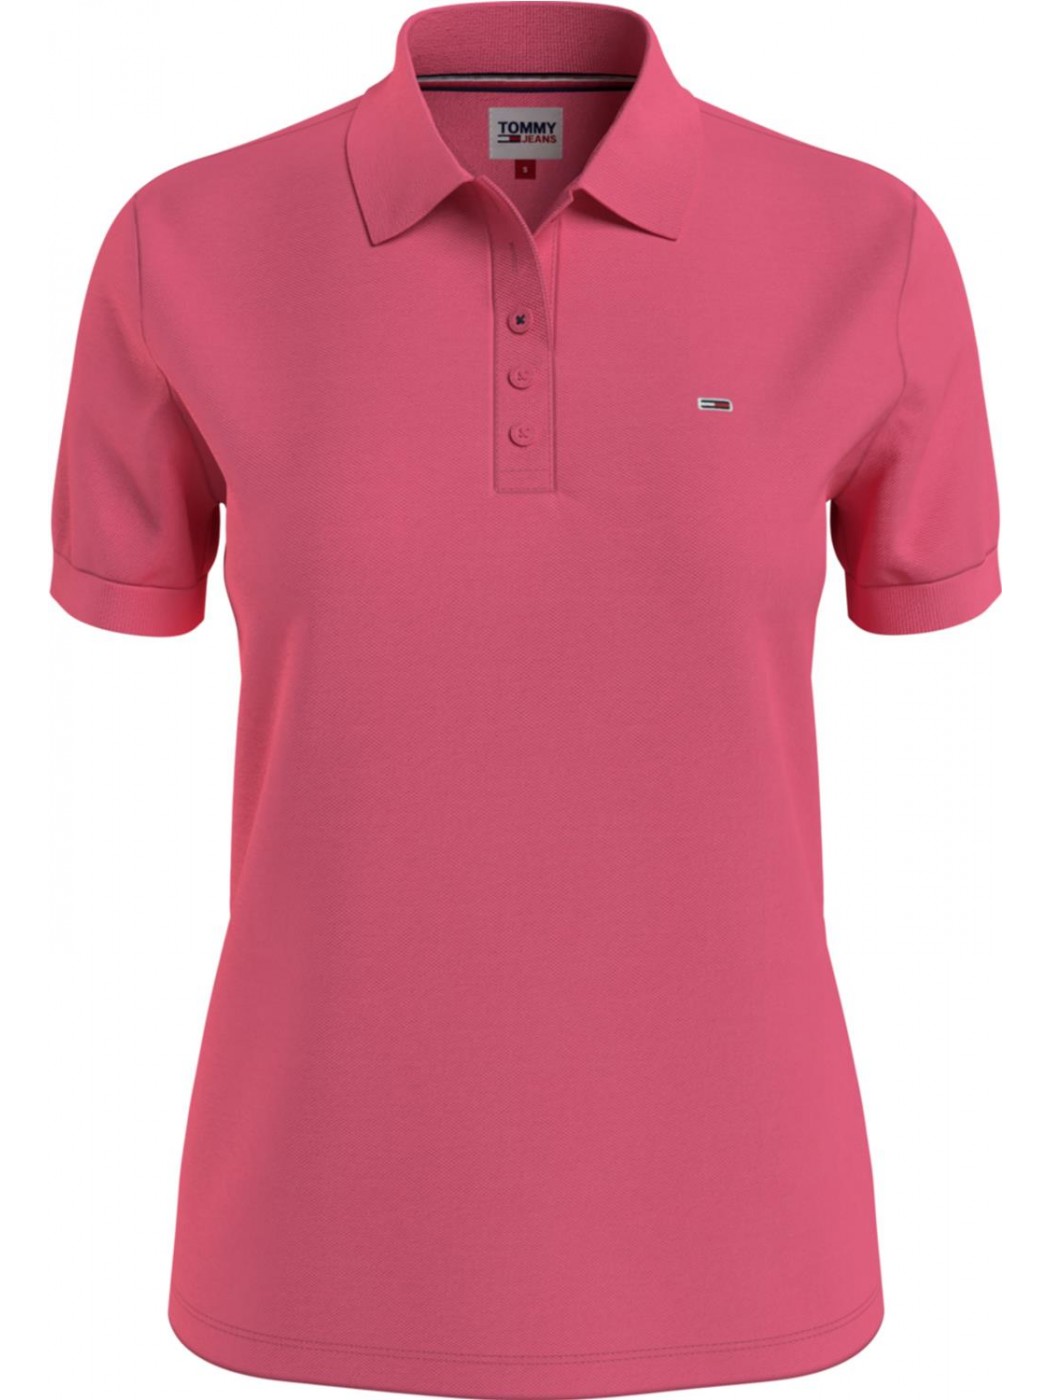 POLO TOMMY JEANS MUJER ROSA...